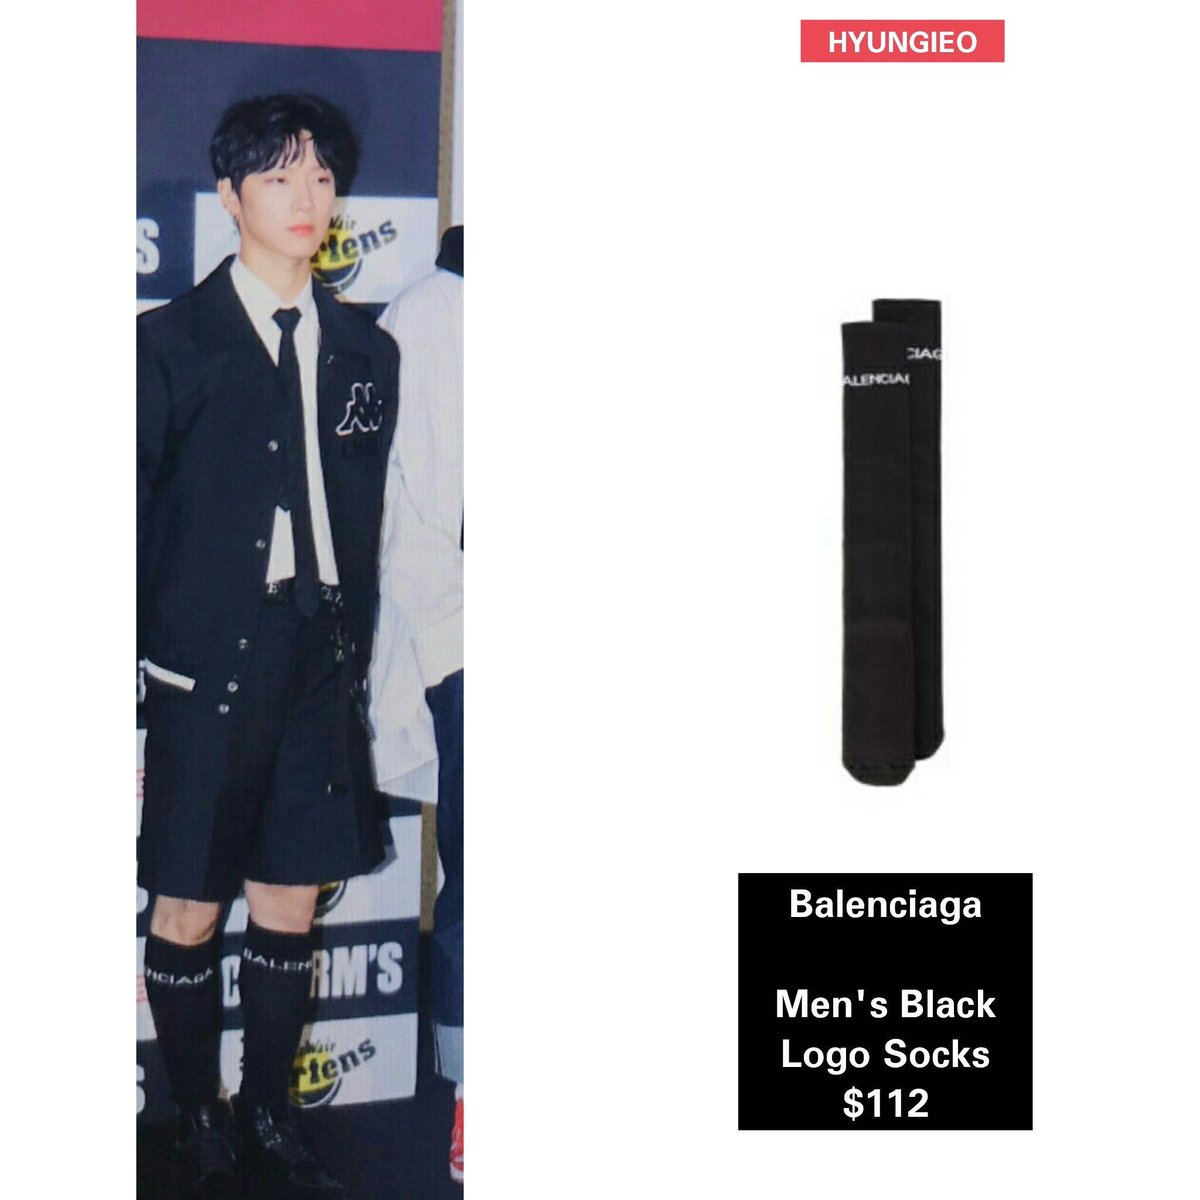 ten was seen wearing these socks so immediately they got sold out